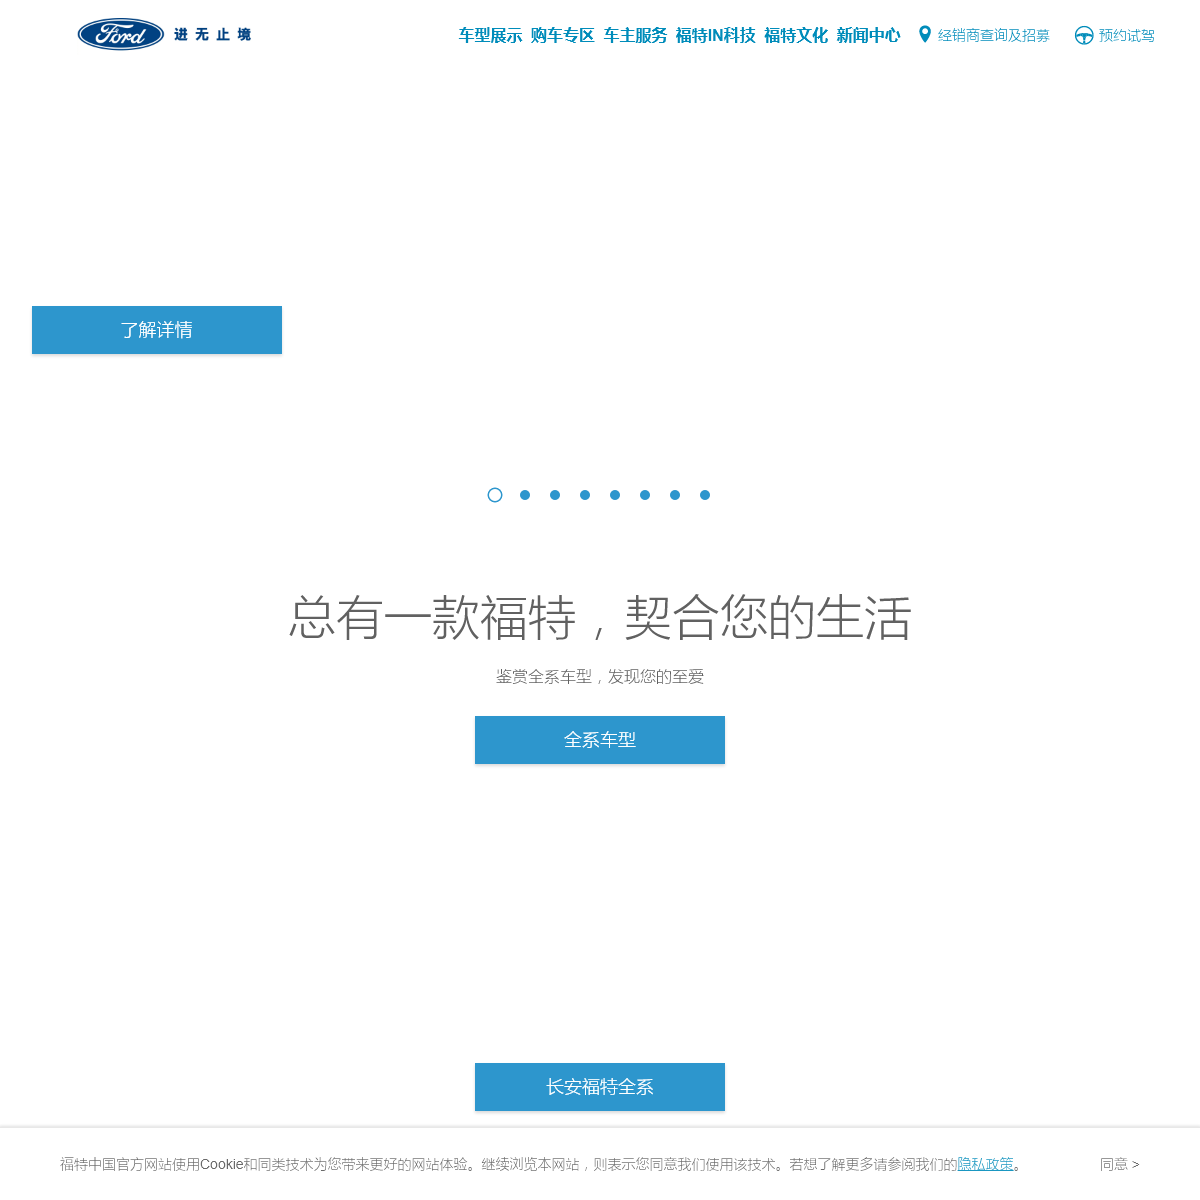 A complete backup of ford.com.cn